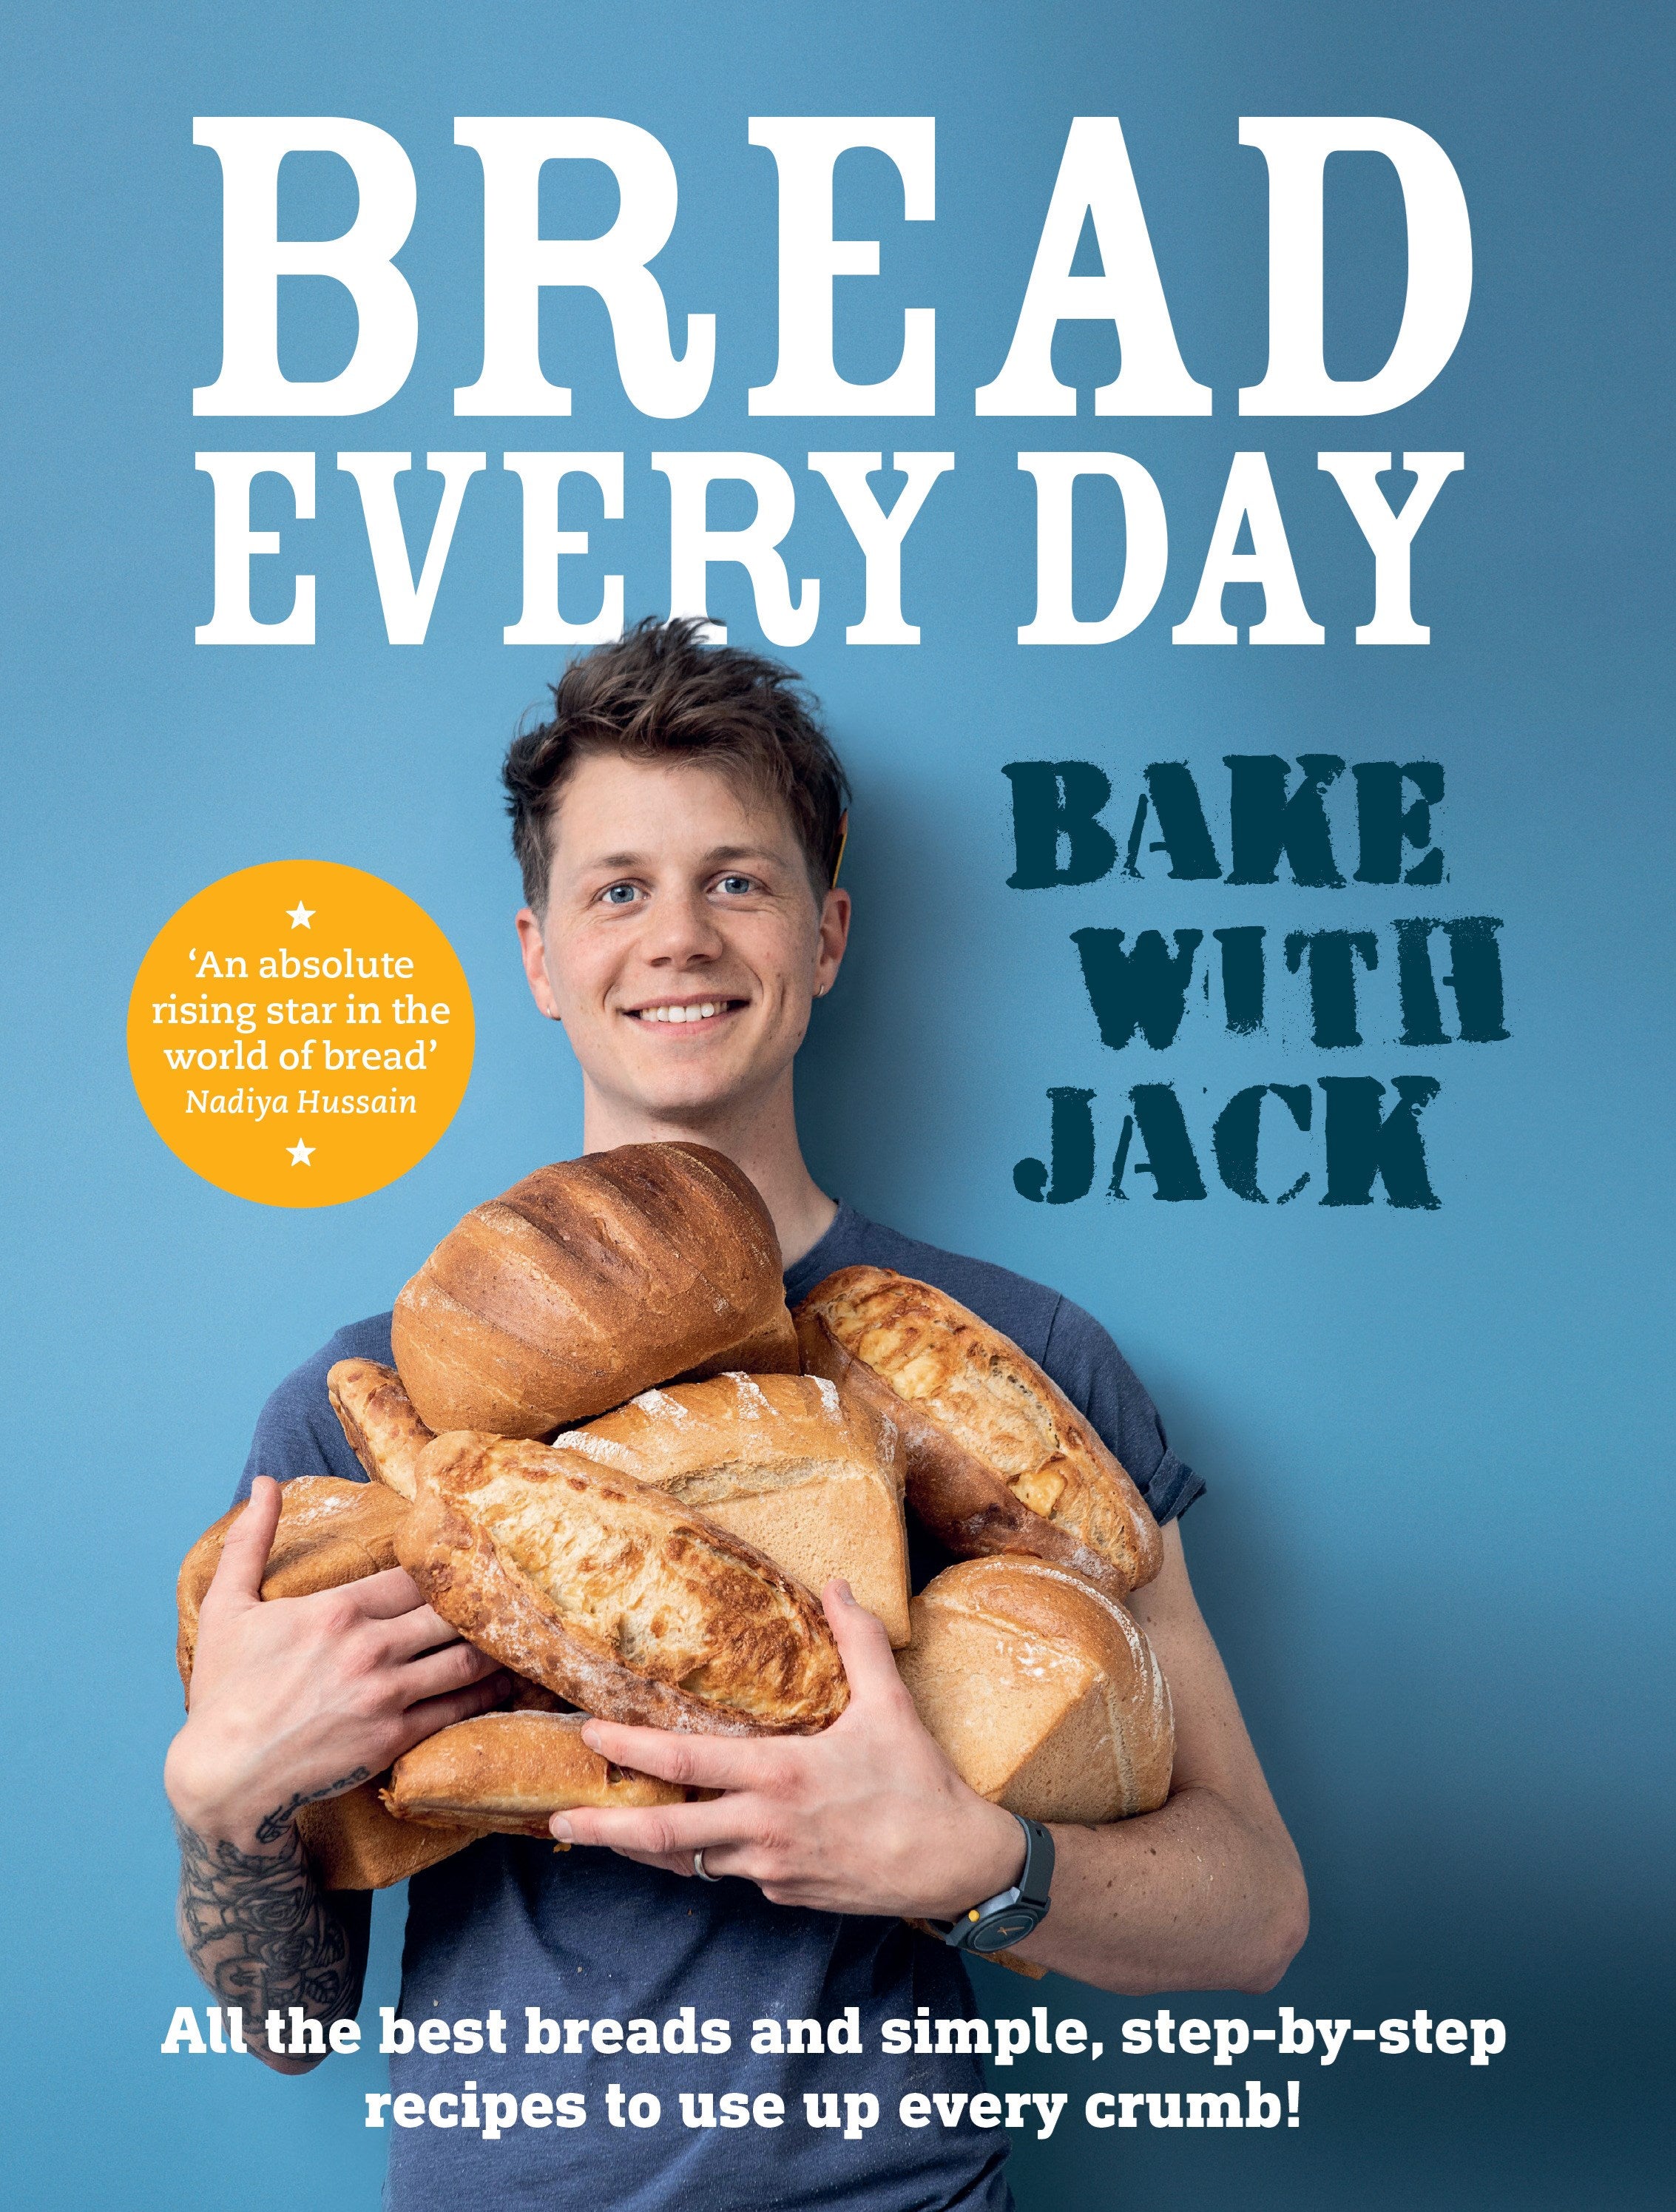 BAKE WITH JACK - Bread Every Day: All the best breads and simple, step-by-step recipes to use up every crumb